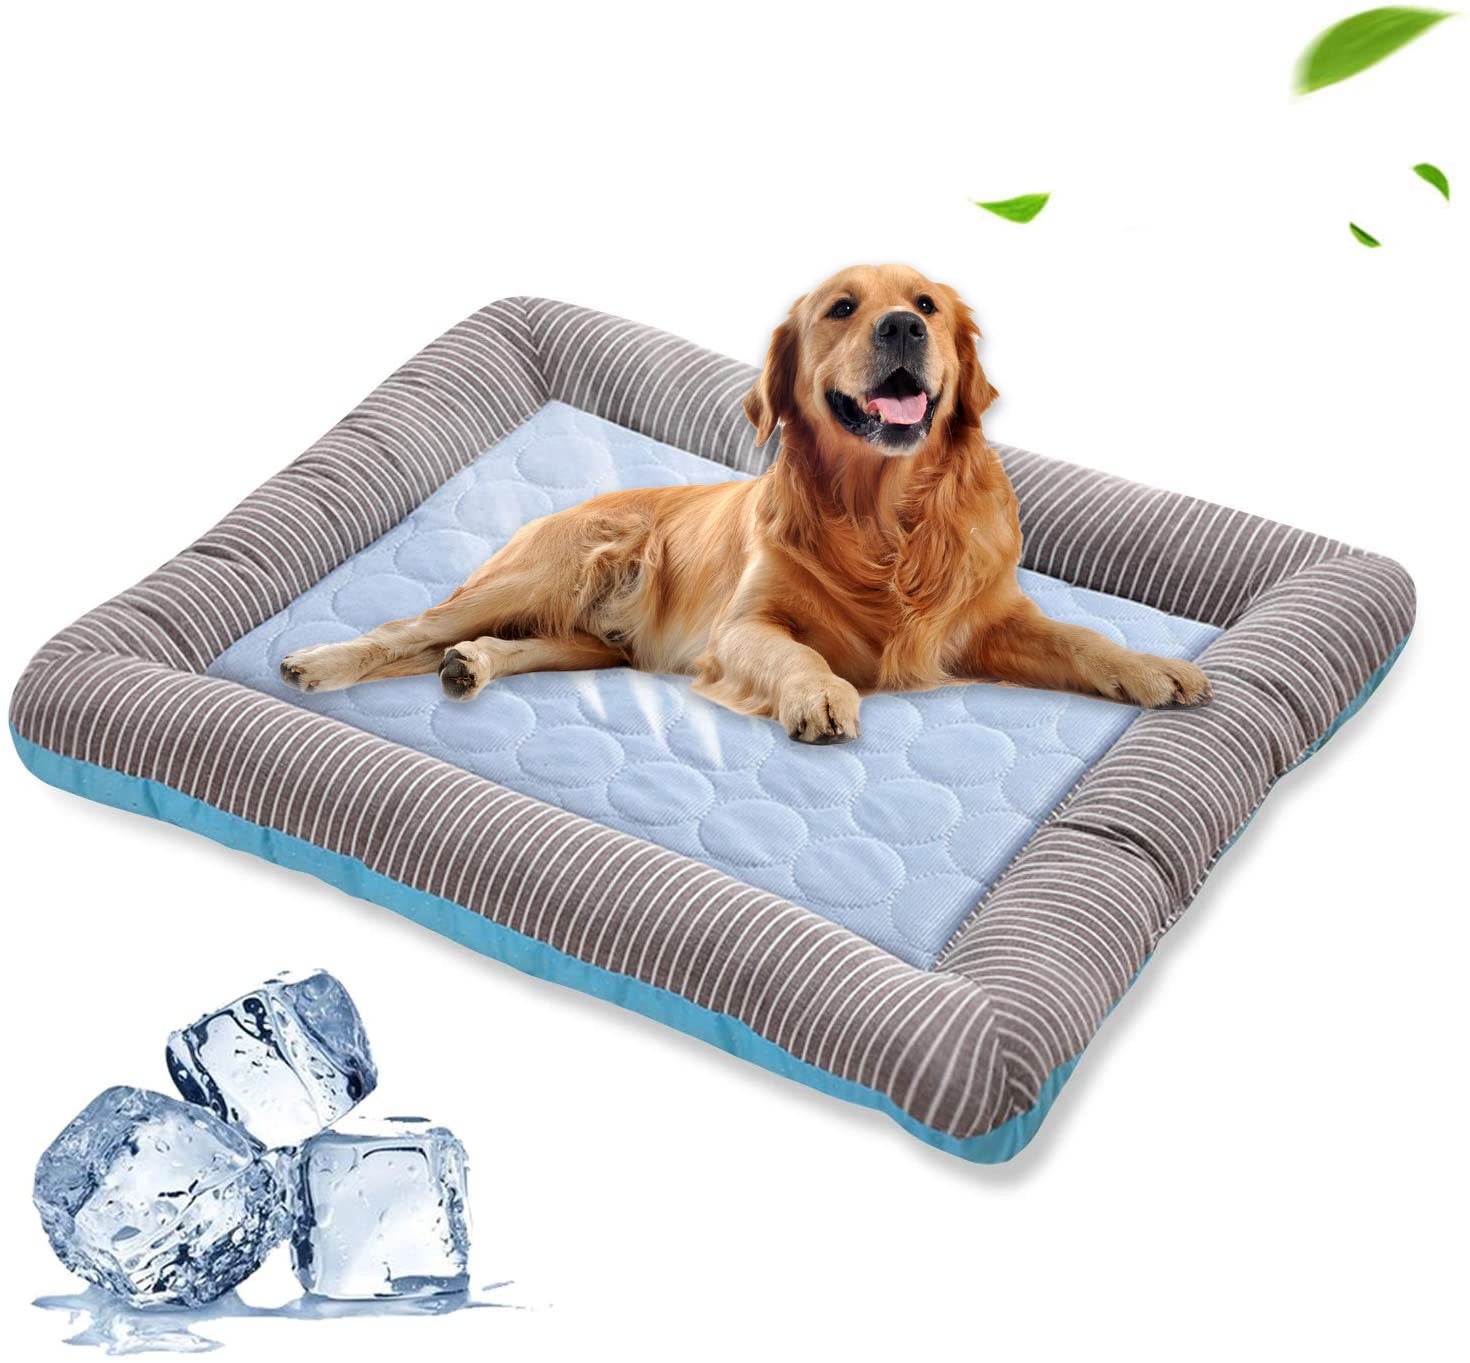 Pet Cooling Pad Bed For Dogs Cats Puppy Kitten Cool Mat Pet Blanket Ice Silk Material Soft For Summer Sleeping  Blue Breathable